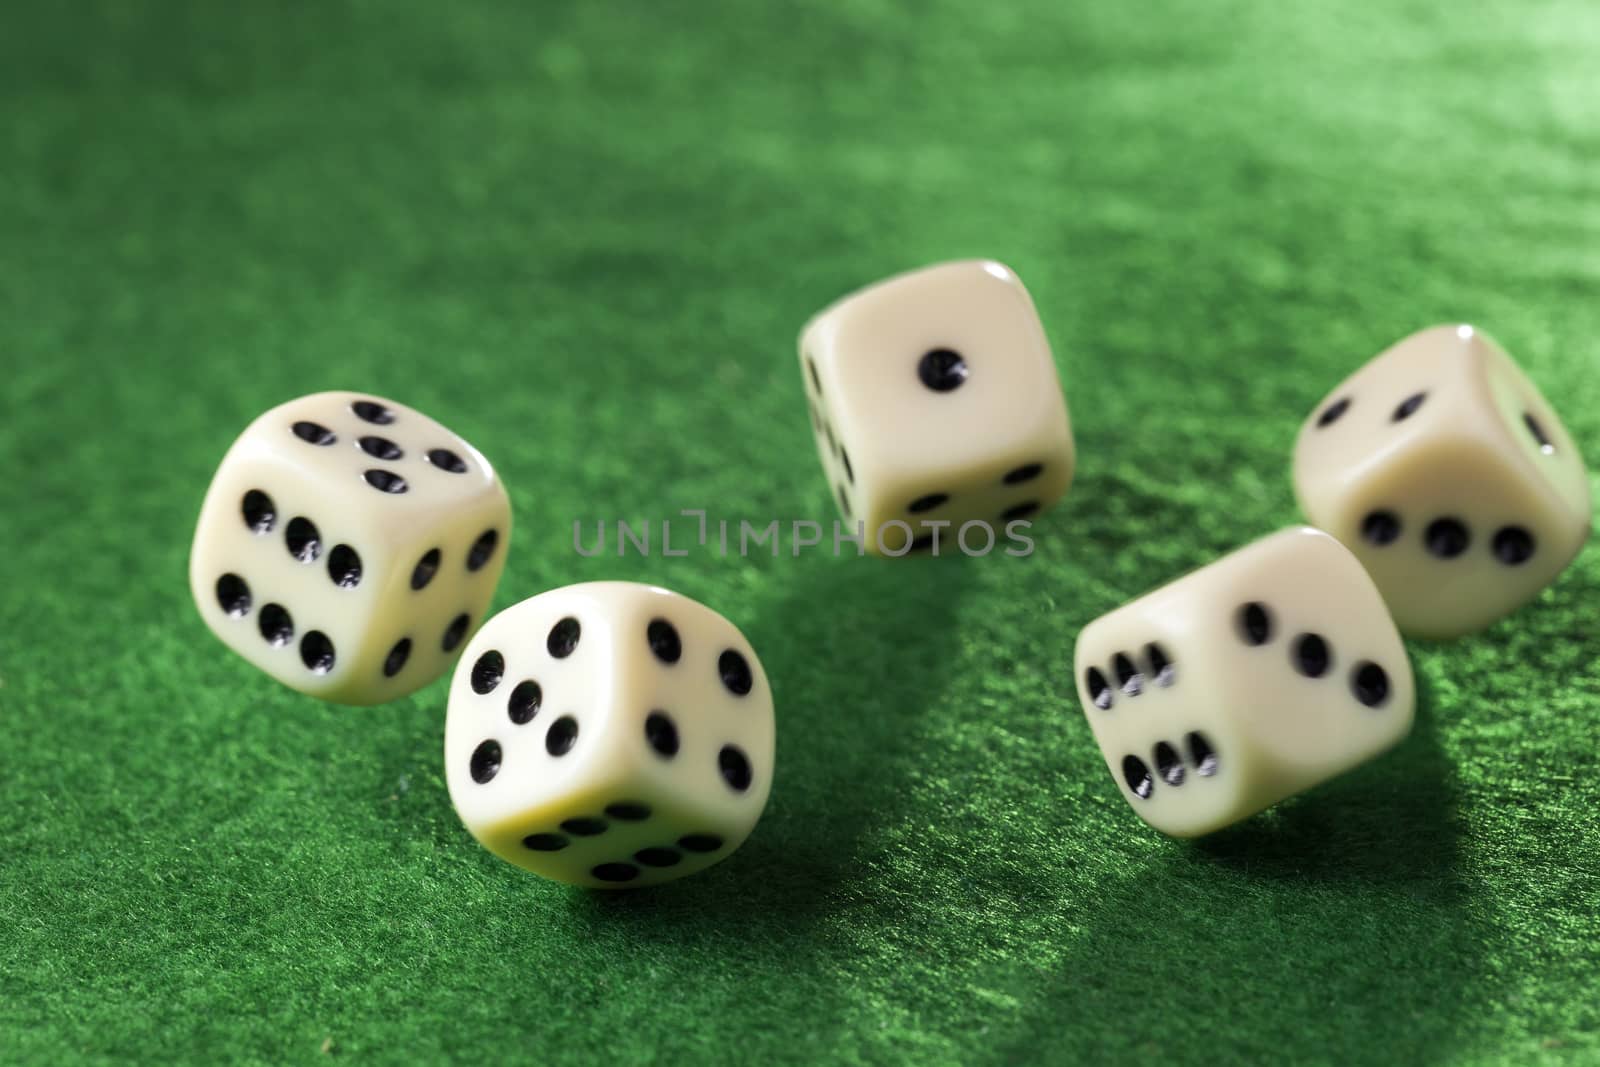 Five rolling dices in motion on green felt